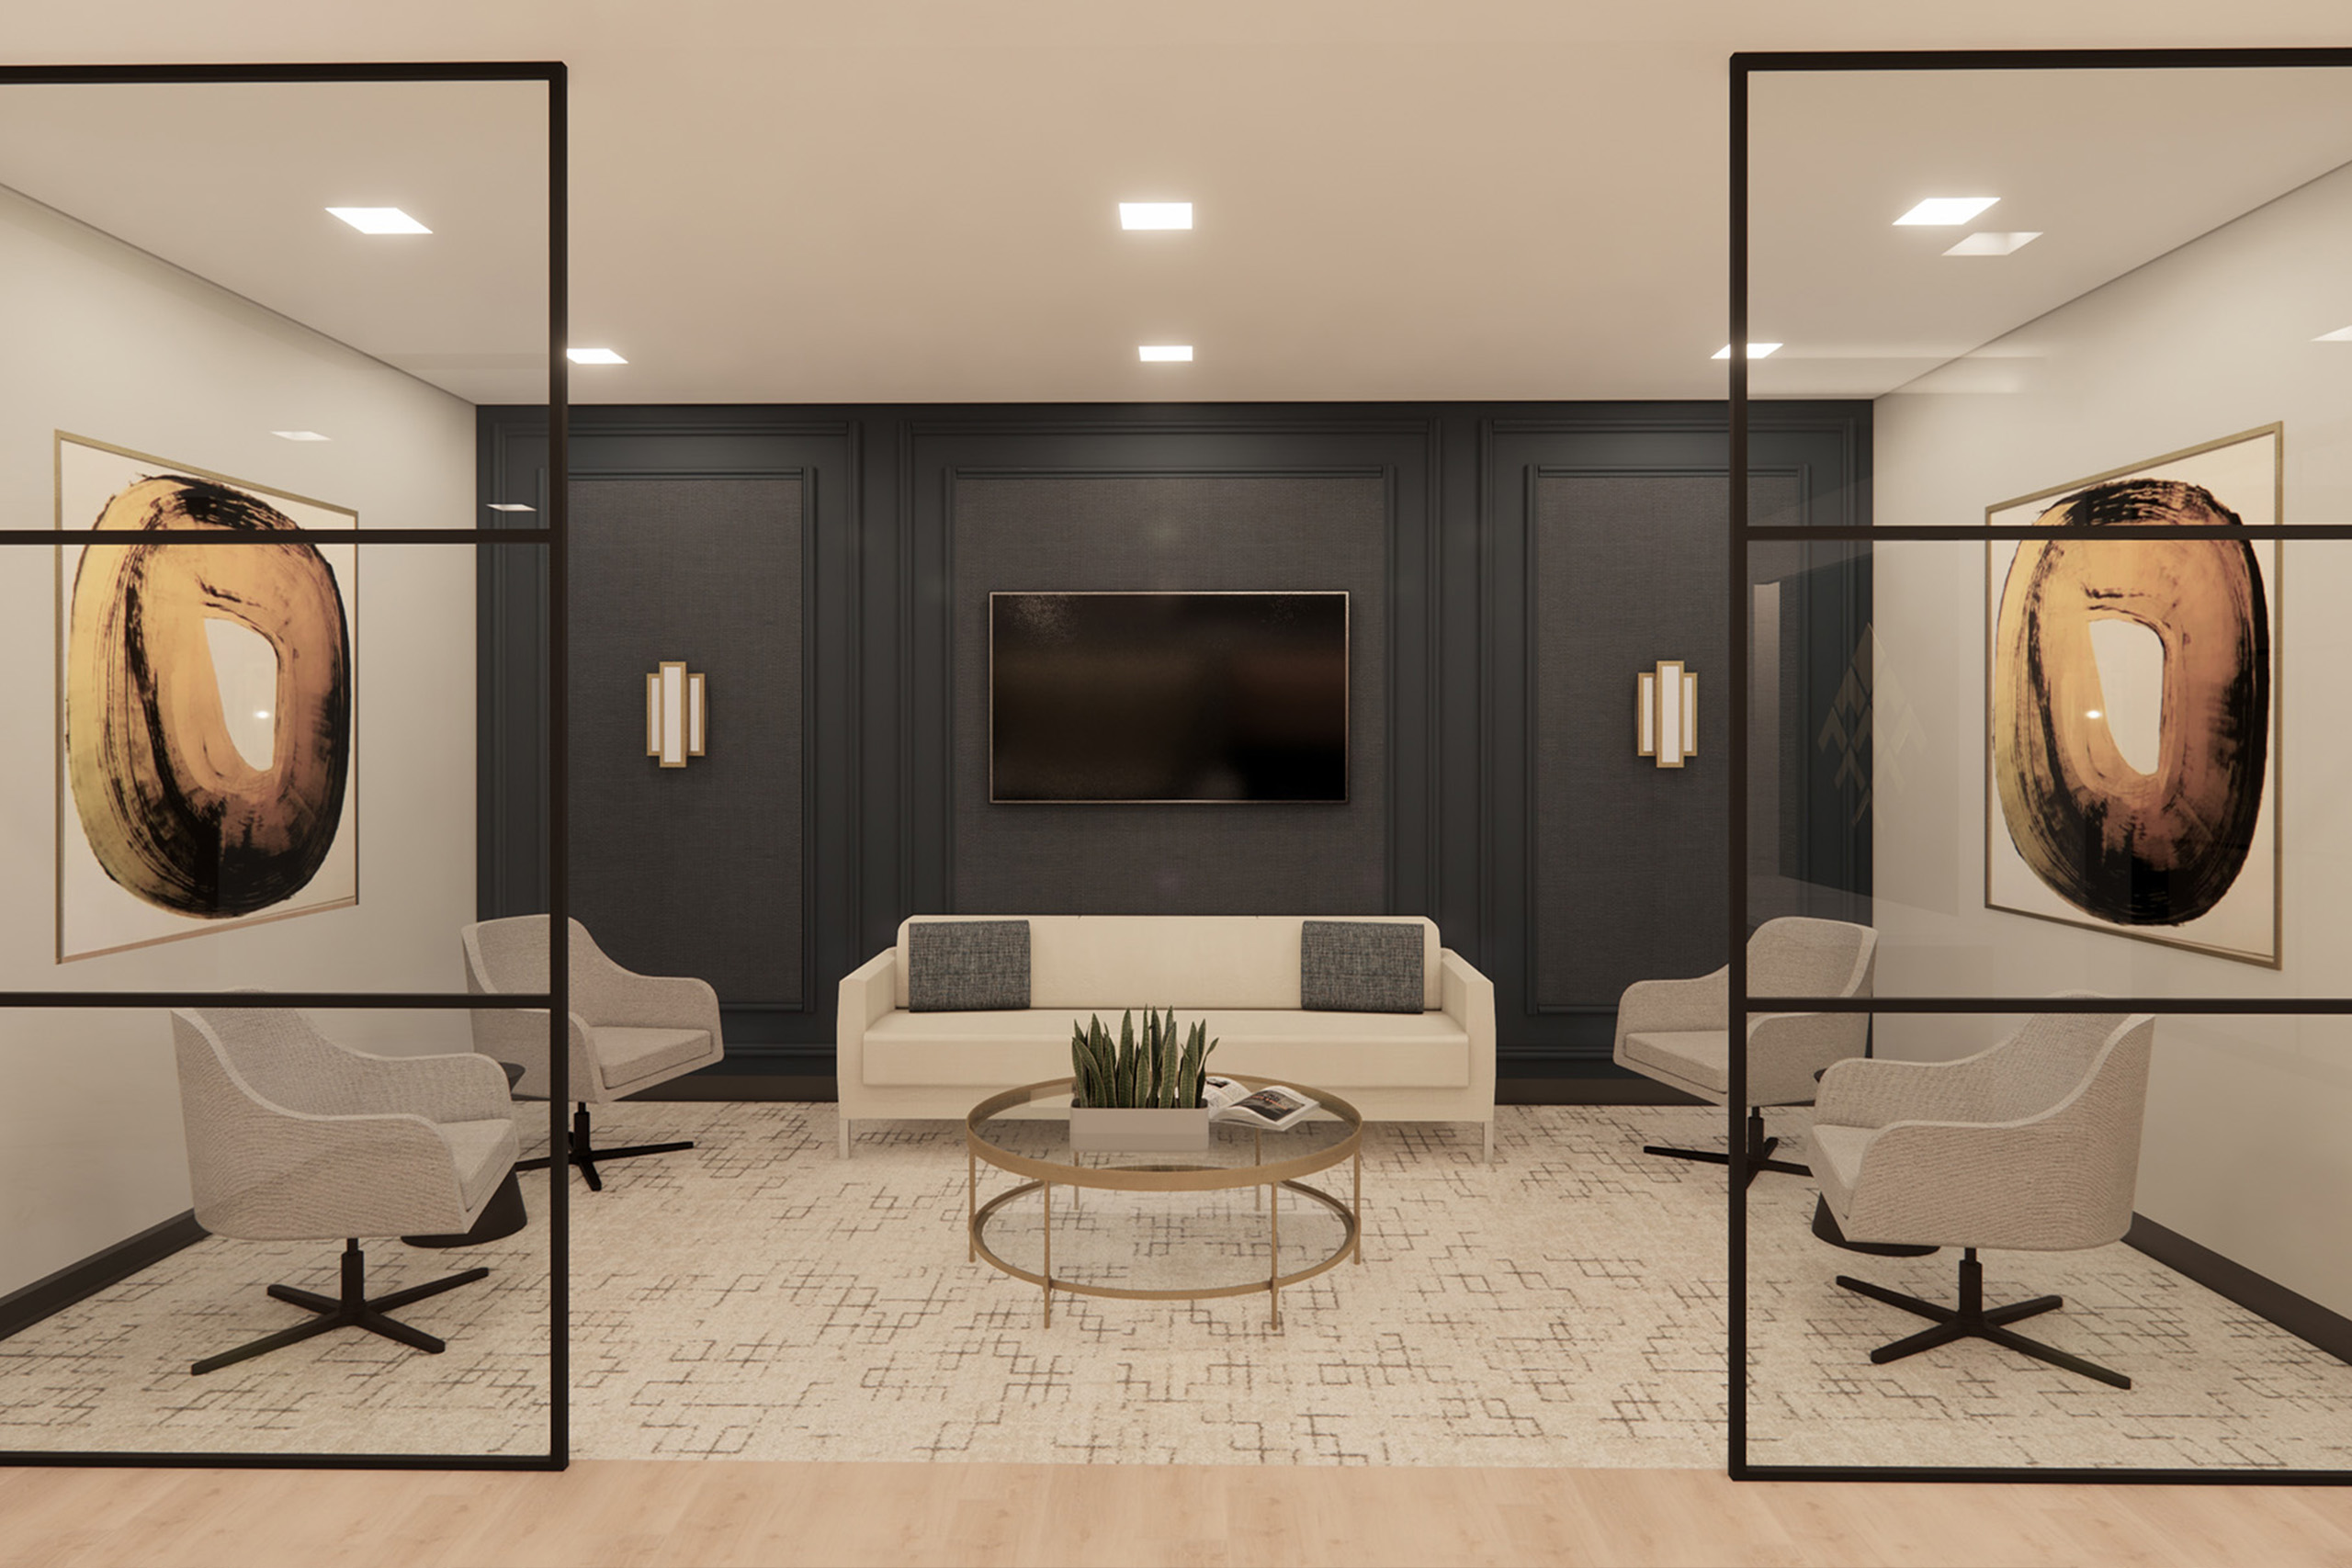 Wealth Management Co. Library Rendering